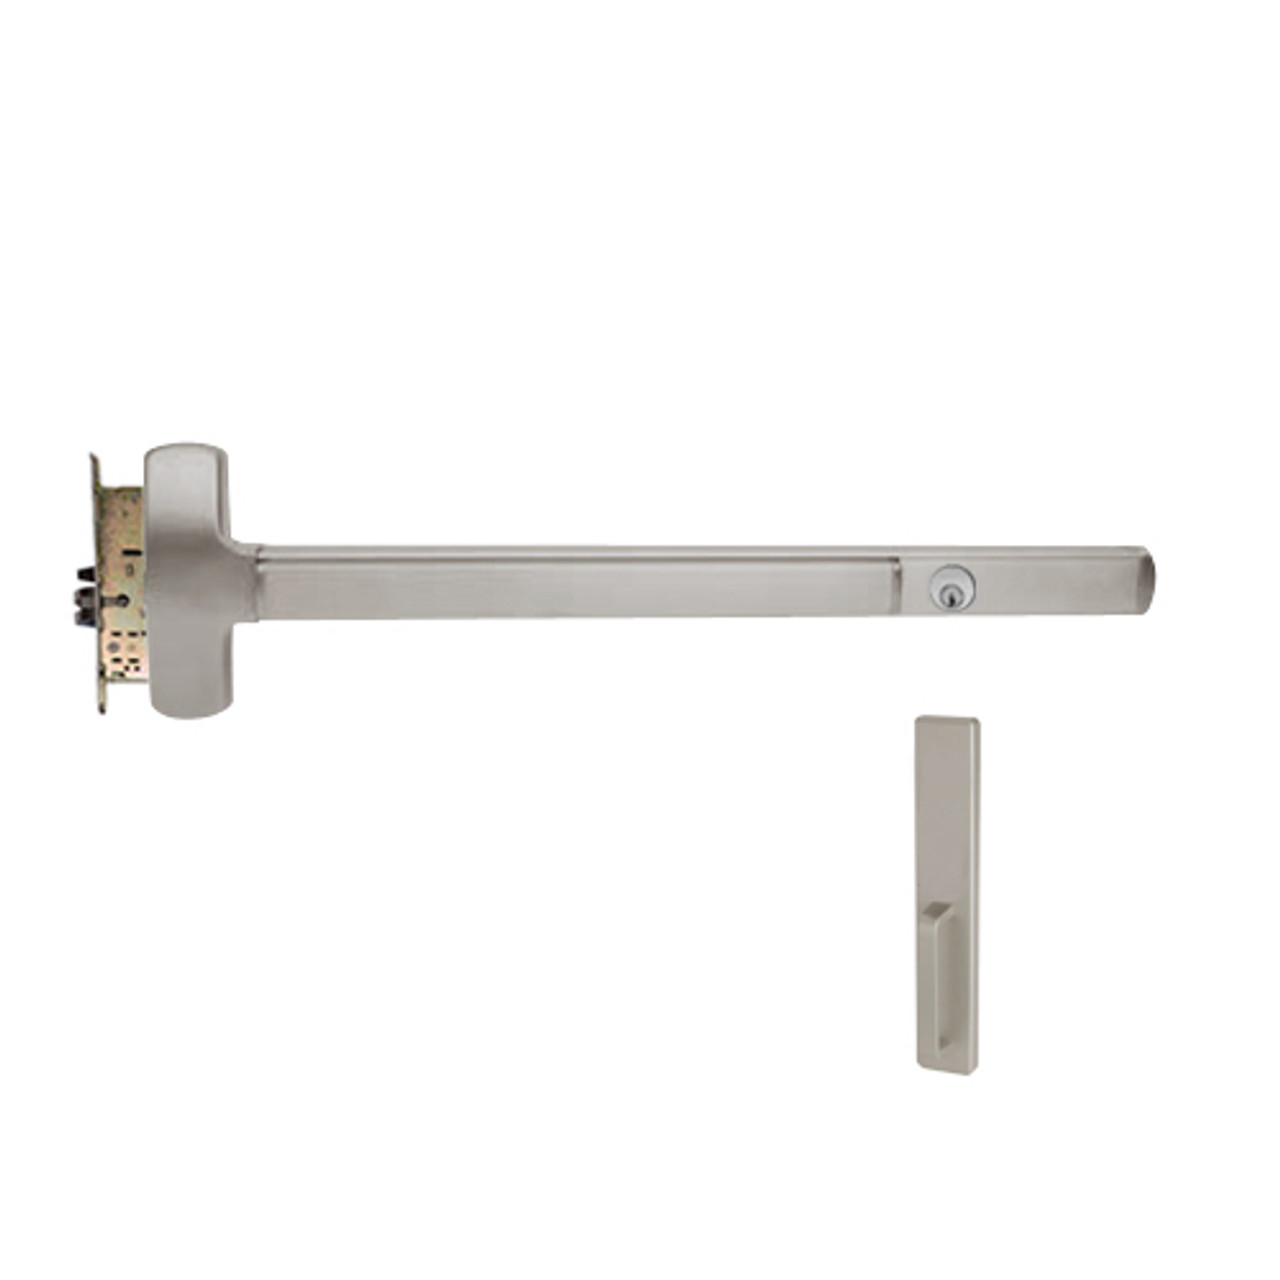 CD25-M-DT-US32D-4-RHR Falcon Exit Device in Satin Stainless Steel